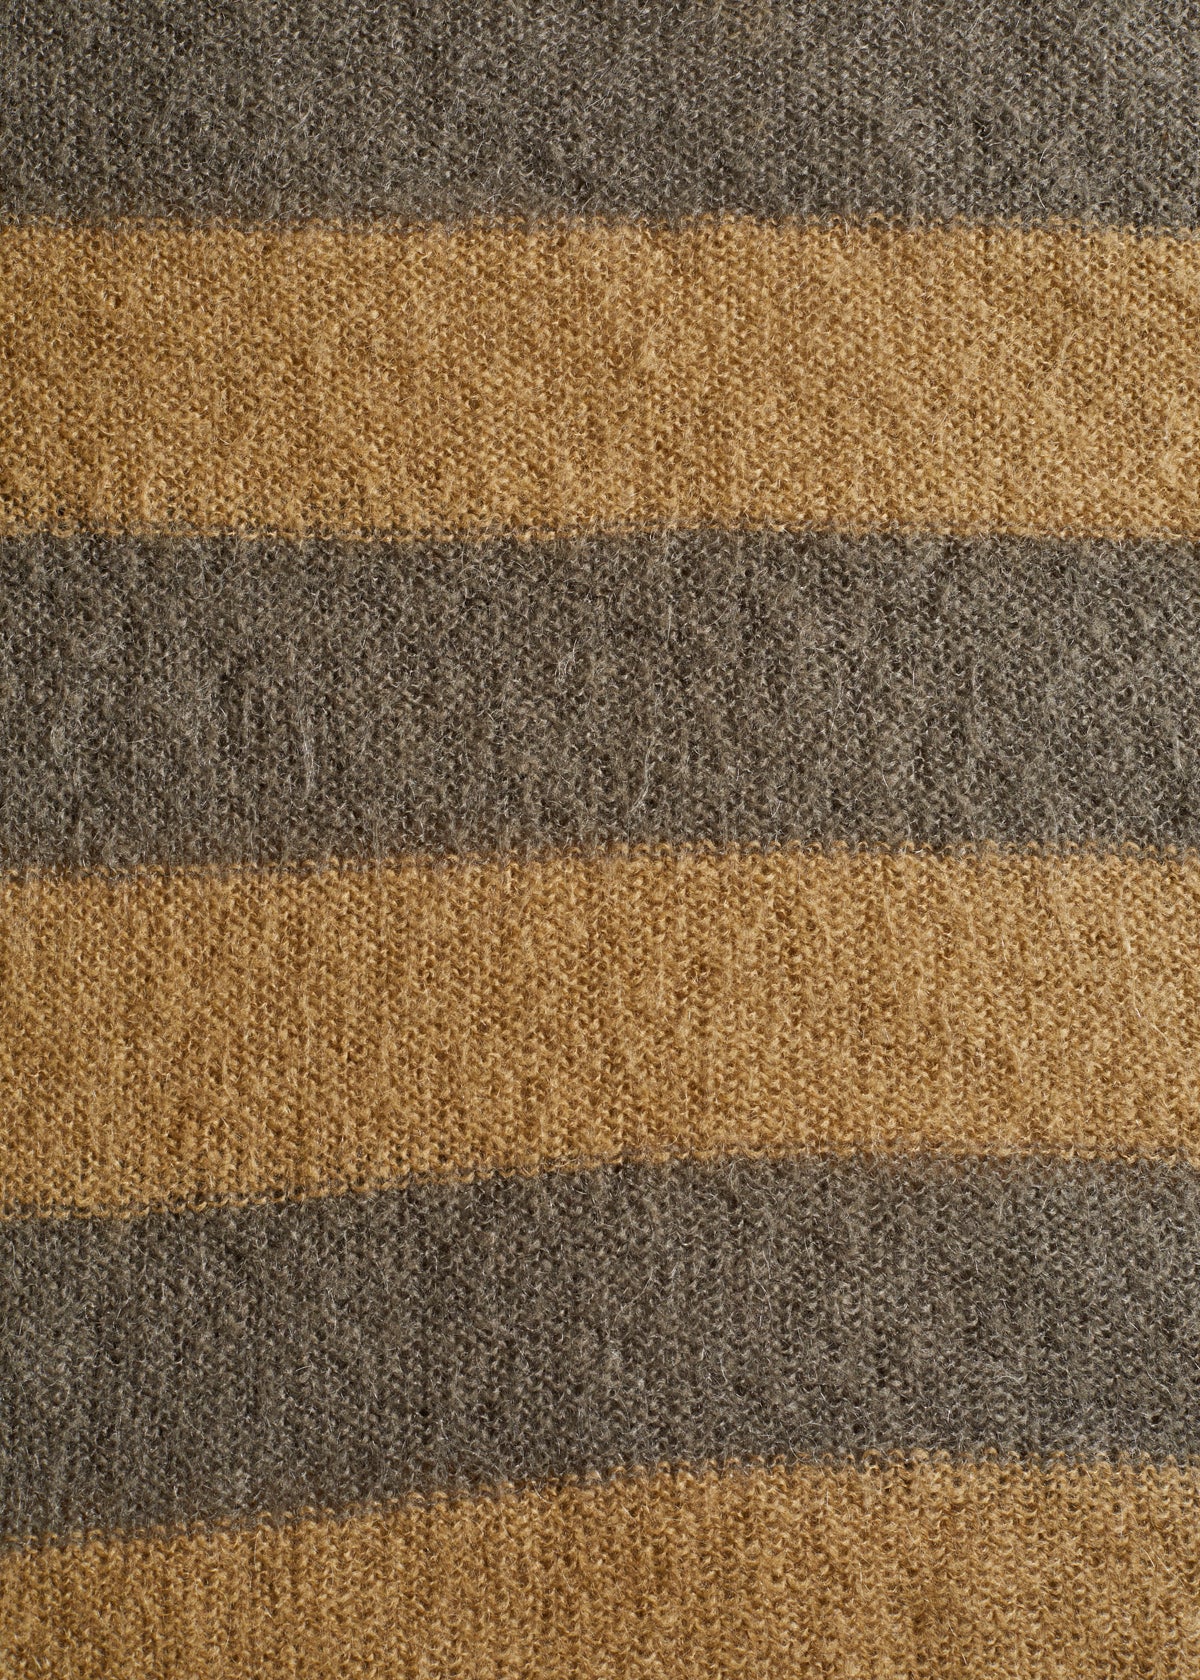 Mohair Striped Knit 1970's - Medium - The Archivist Store